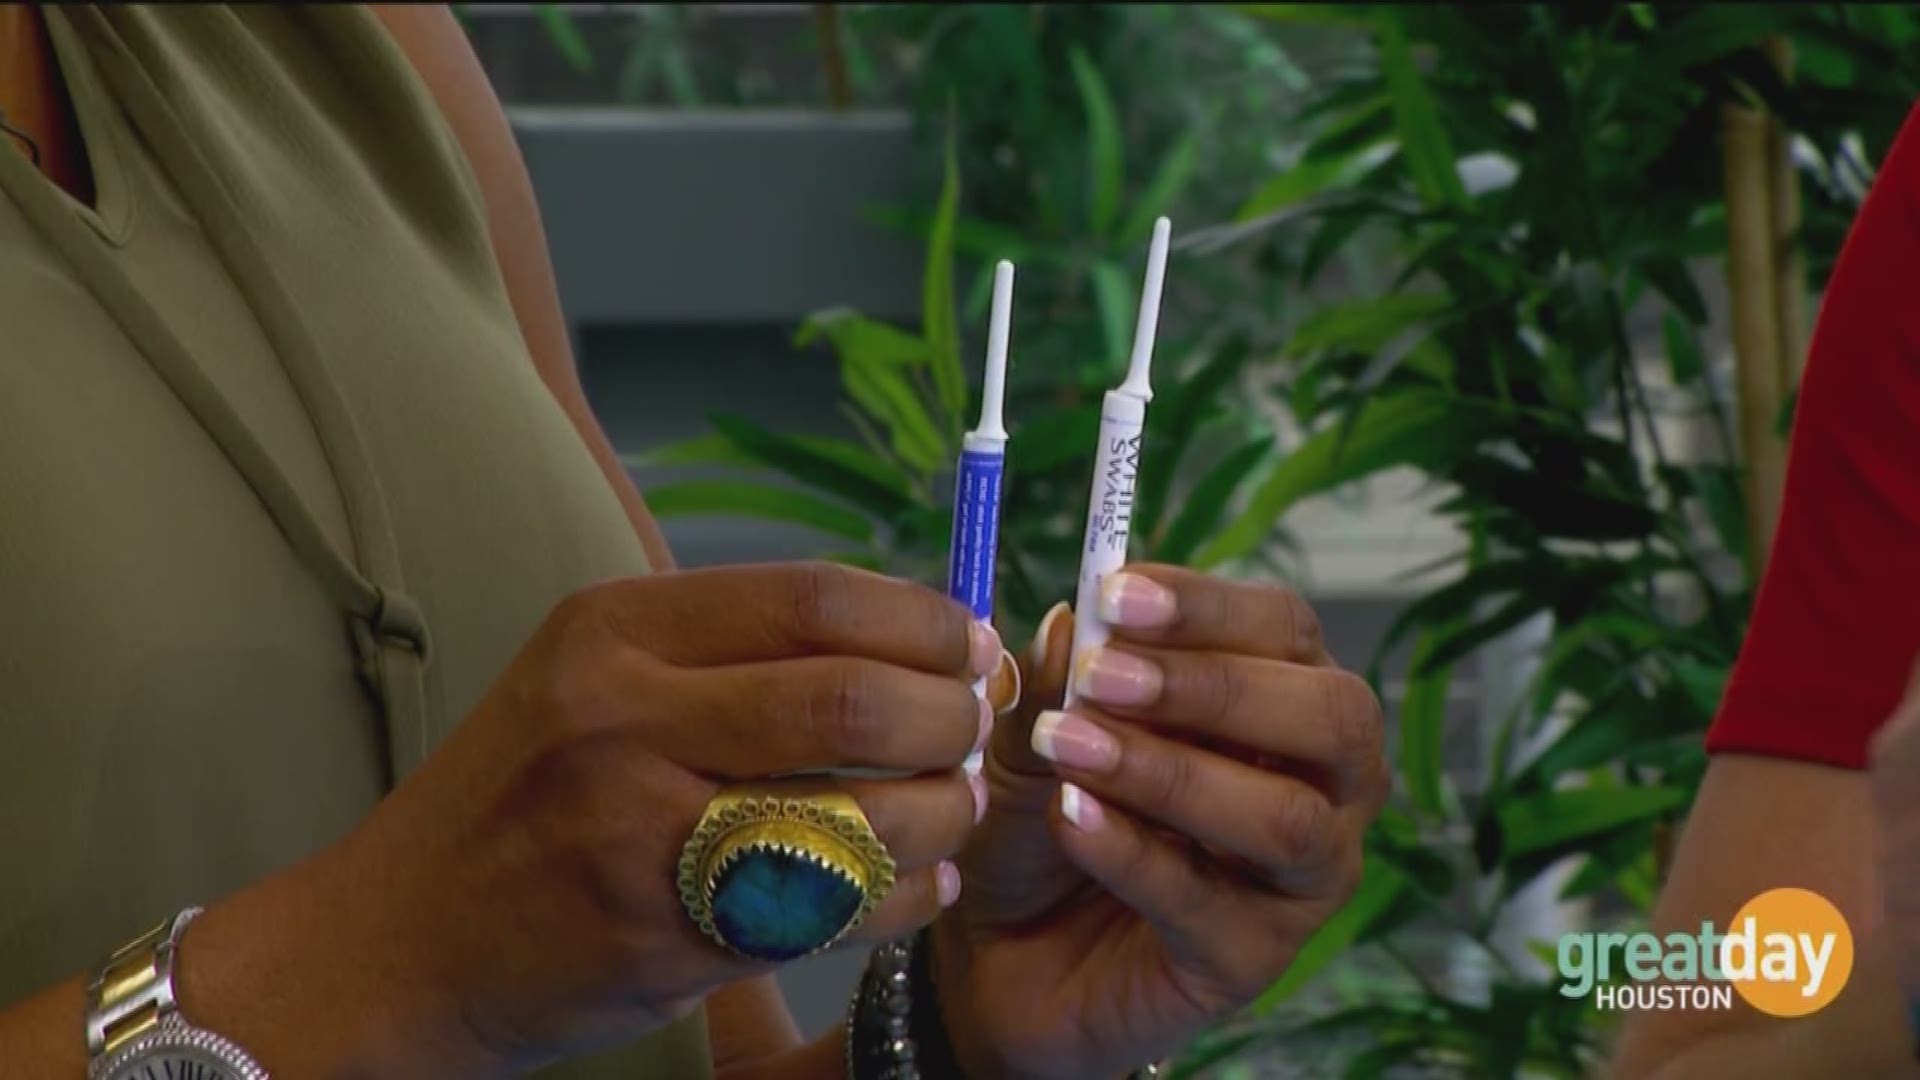 Lifestyle Expert Scott DeFalco demonstrates how Power Swabs can give you whiter teeth in minutes.
